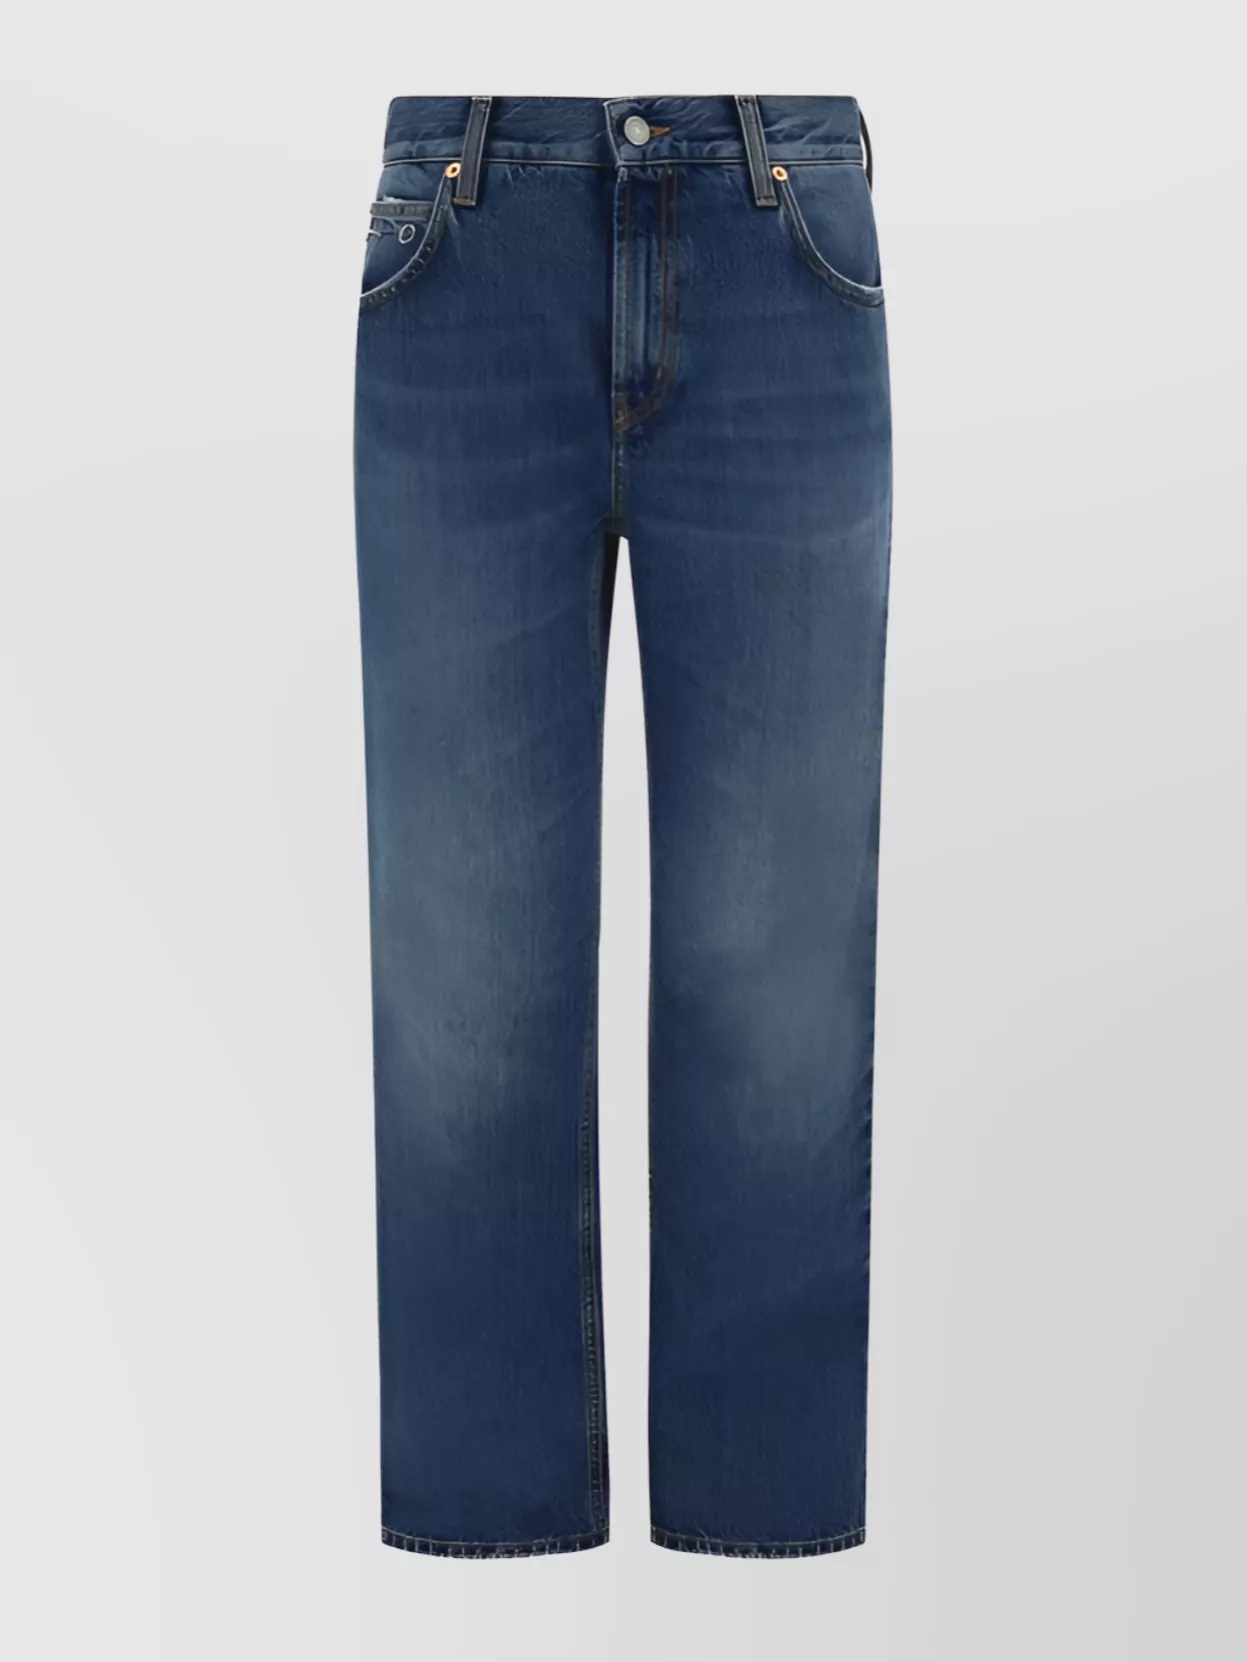 Shop Gucci Straight Cotton Jeans Faded Wash